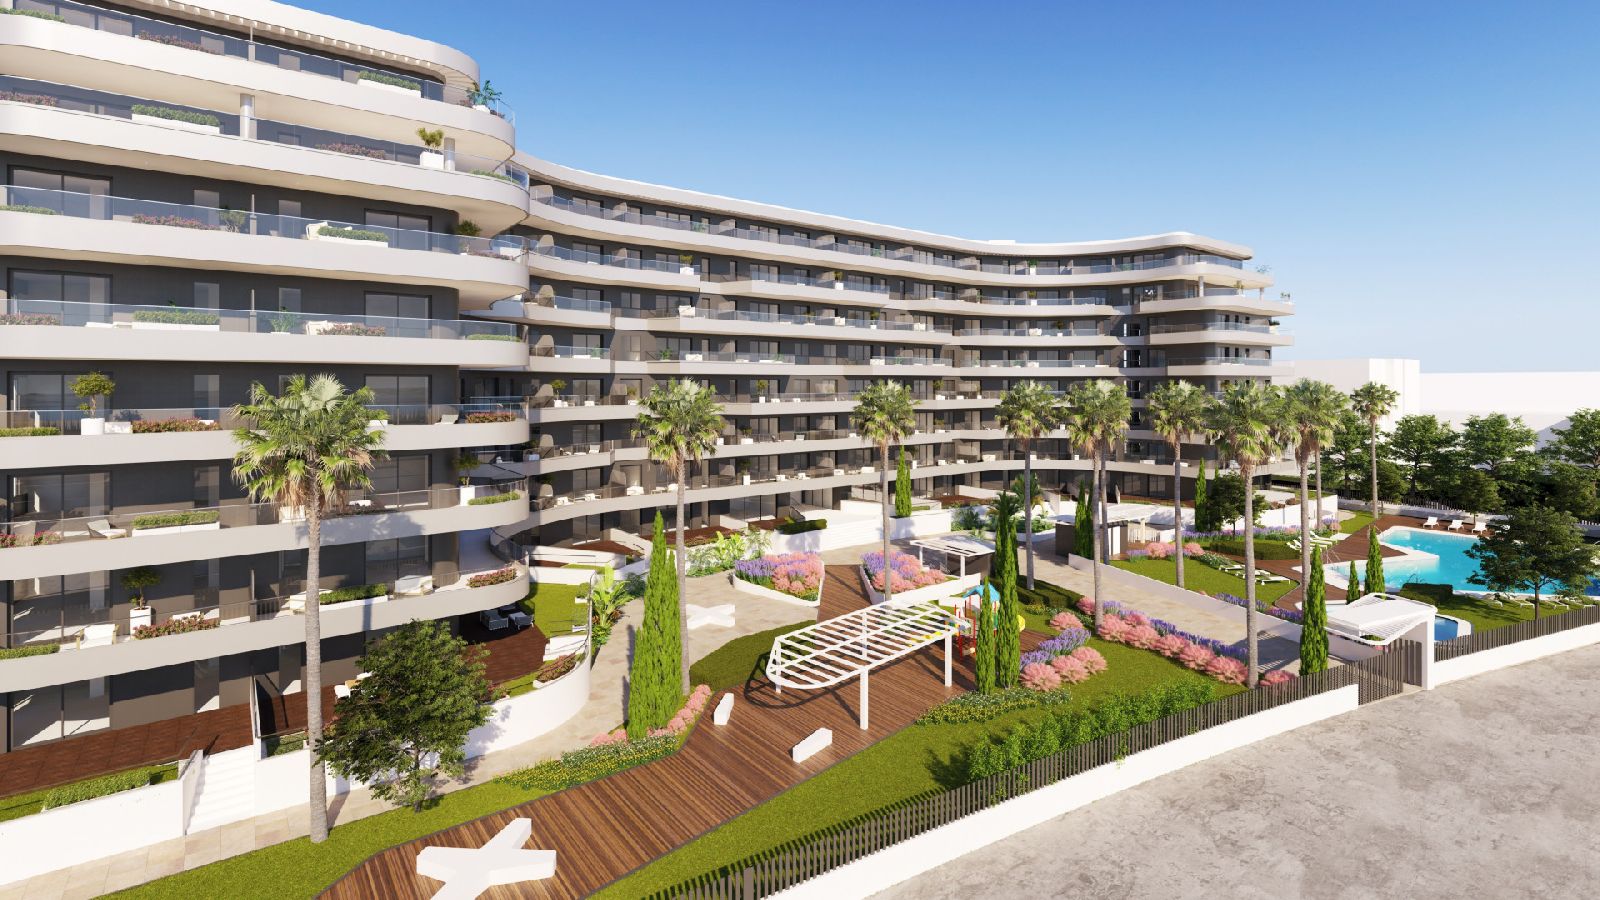 Stylish residential complex in the second line of the beach in Malaga